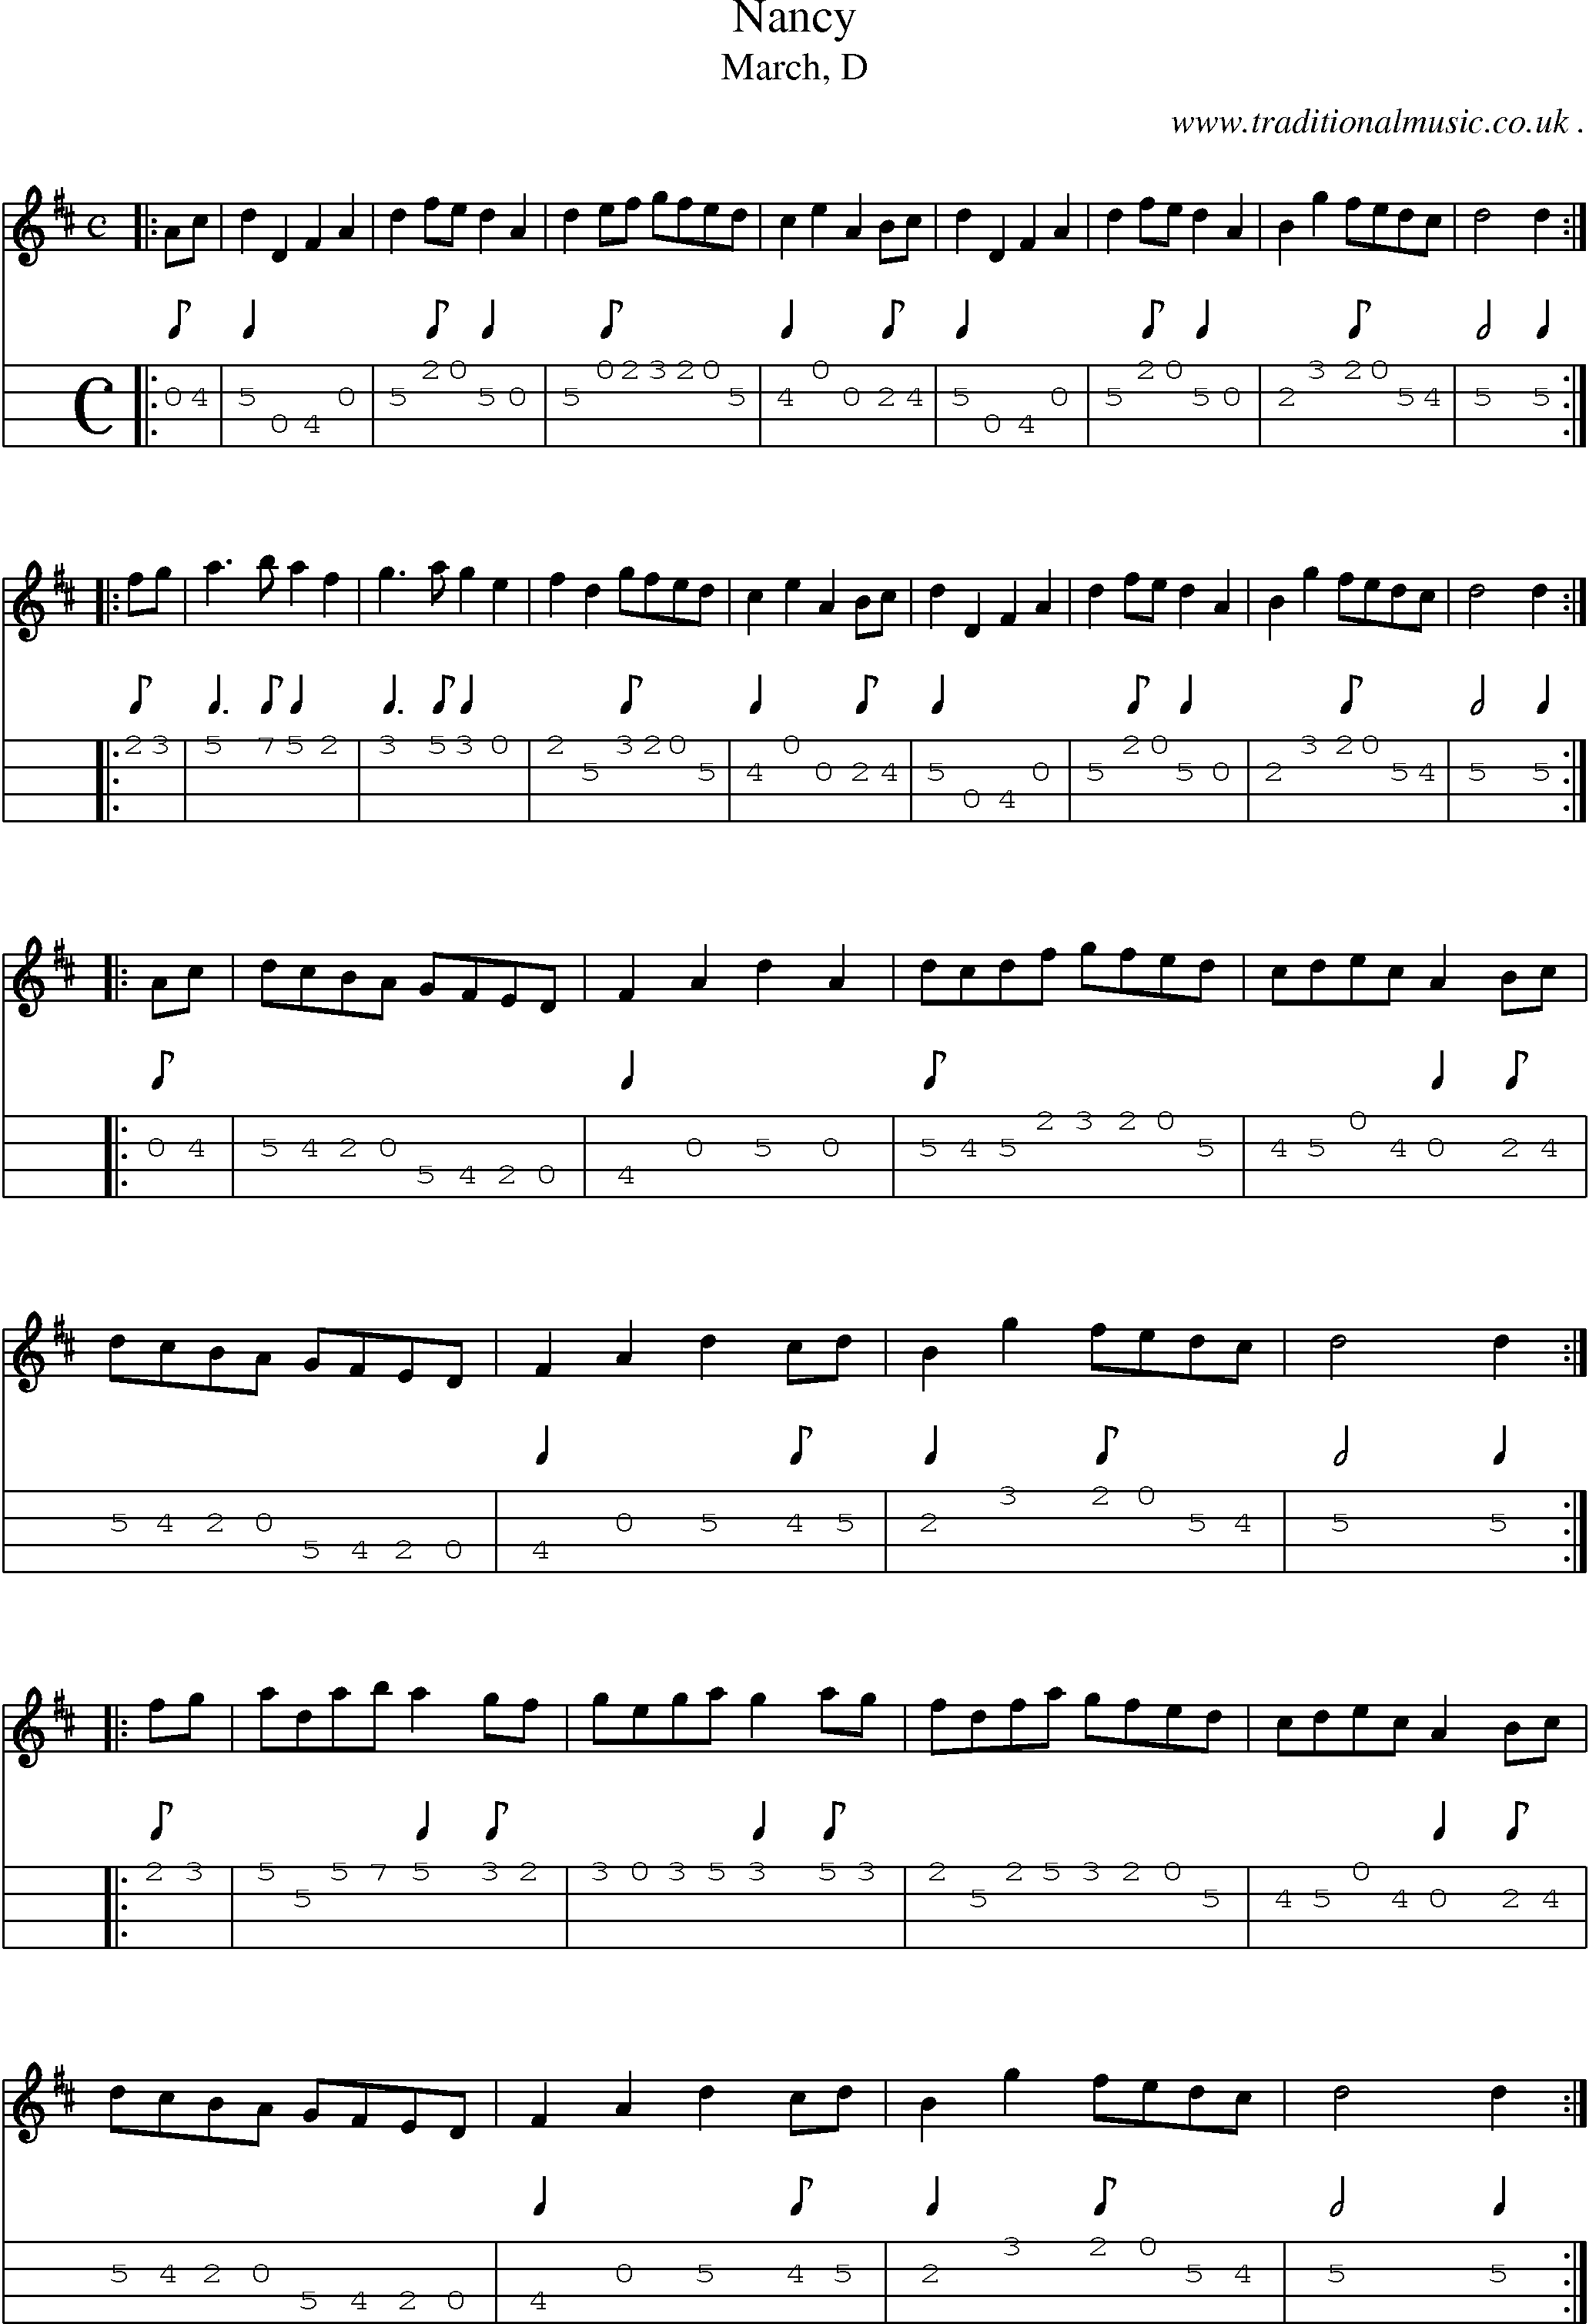 Sheet-music  score, Chords and Mandolin Tabs for Nancy